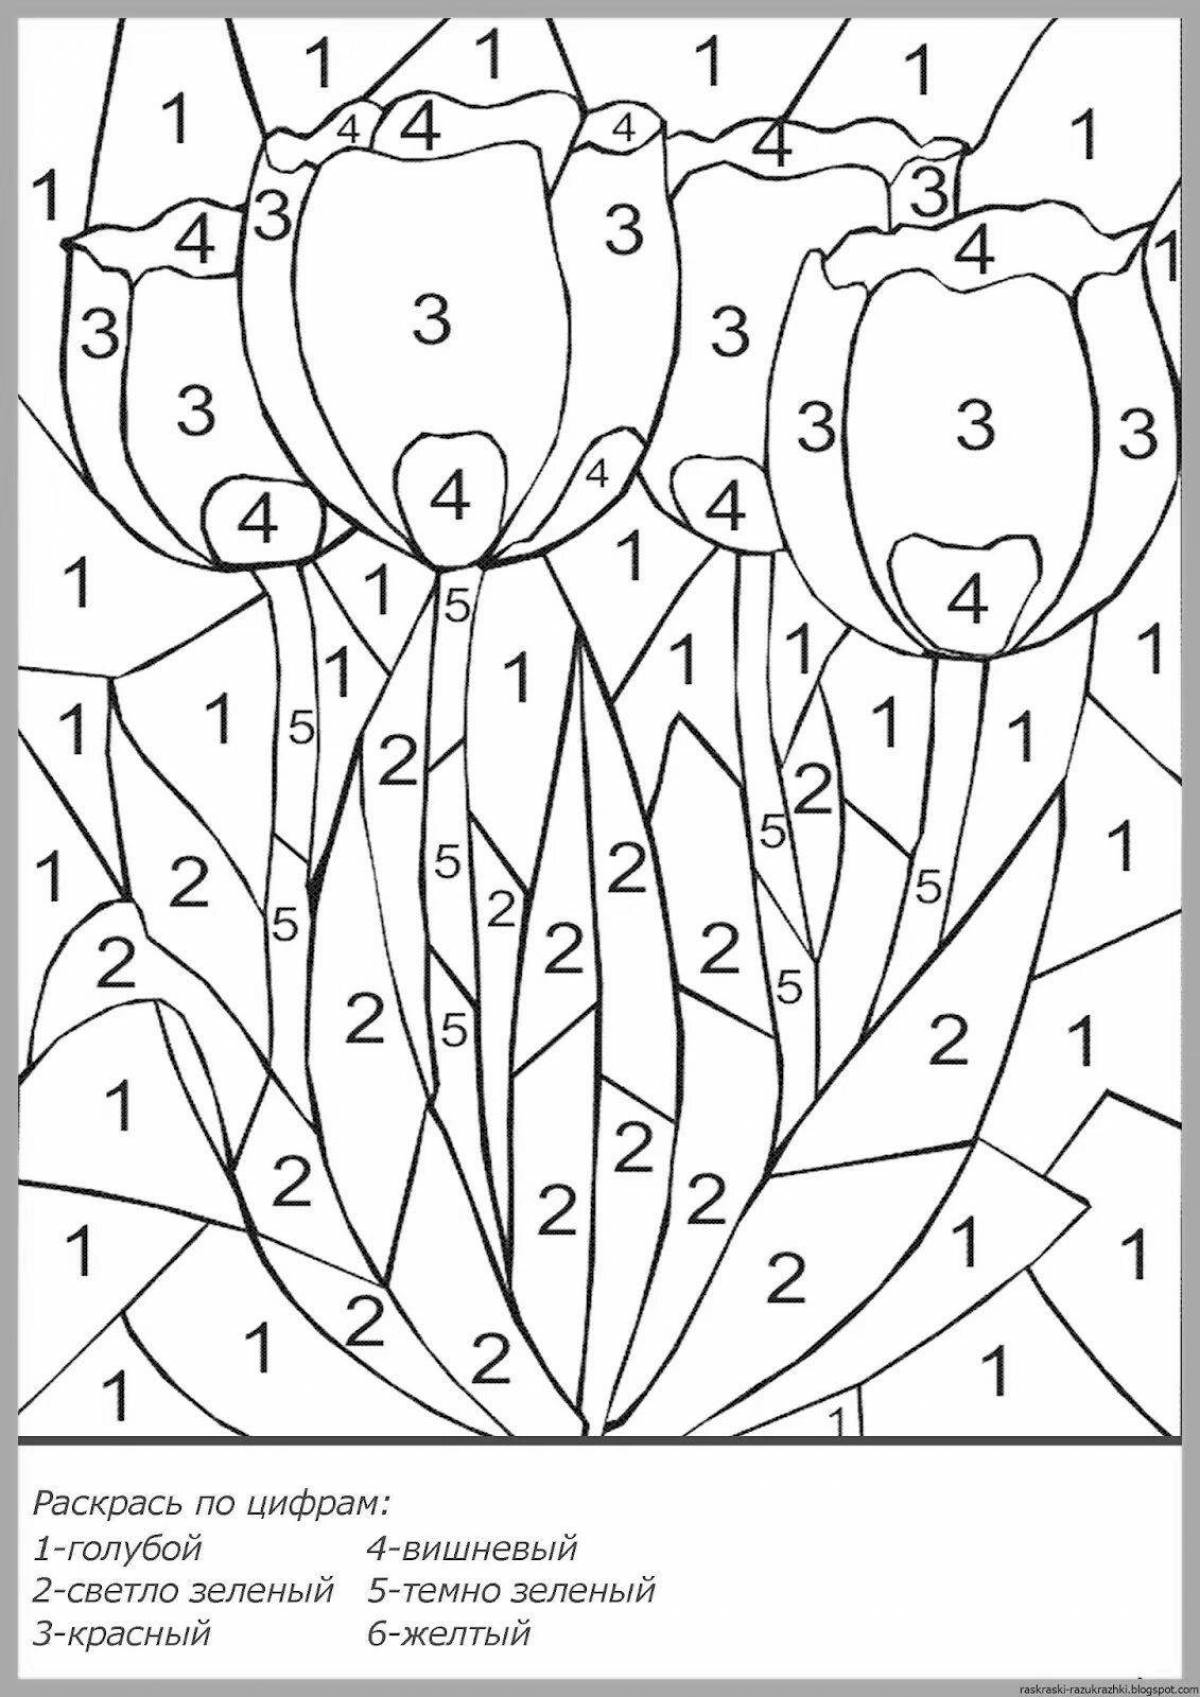 Colorful coloring page 6 years by numbers